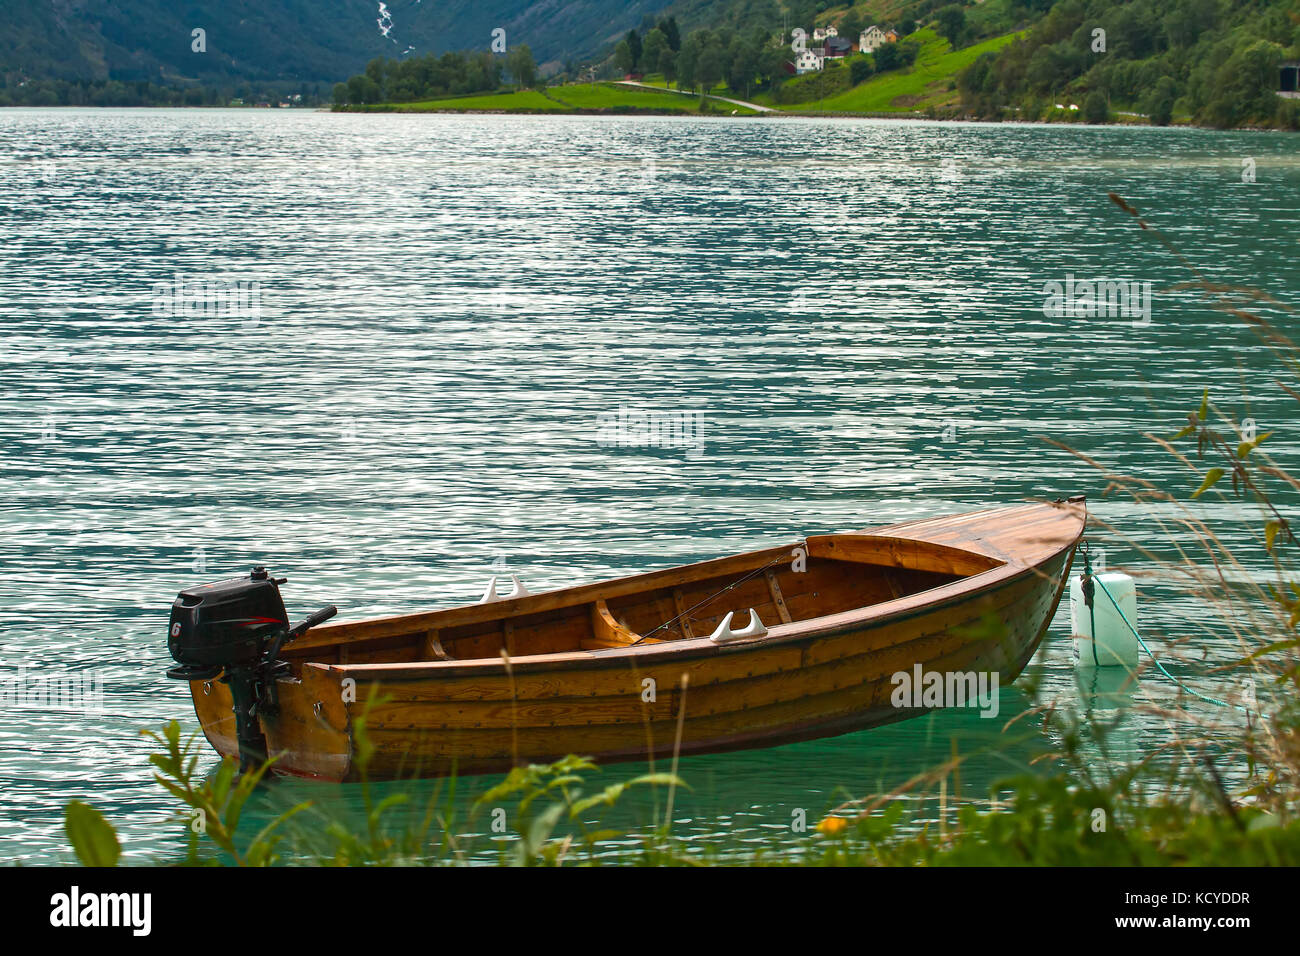 Boat Without Engine Stock Photos & Boat Without Engine Stock Images - Alamy